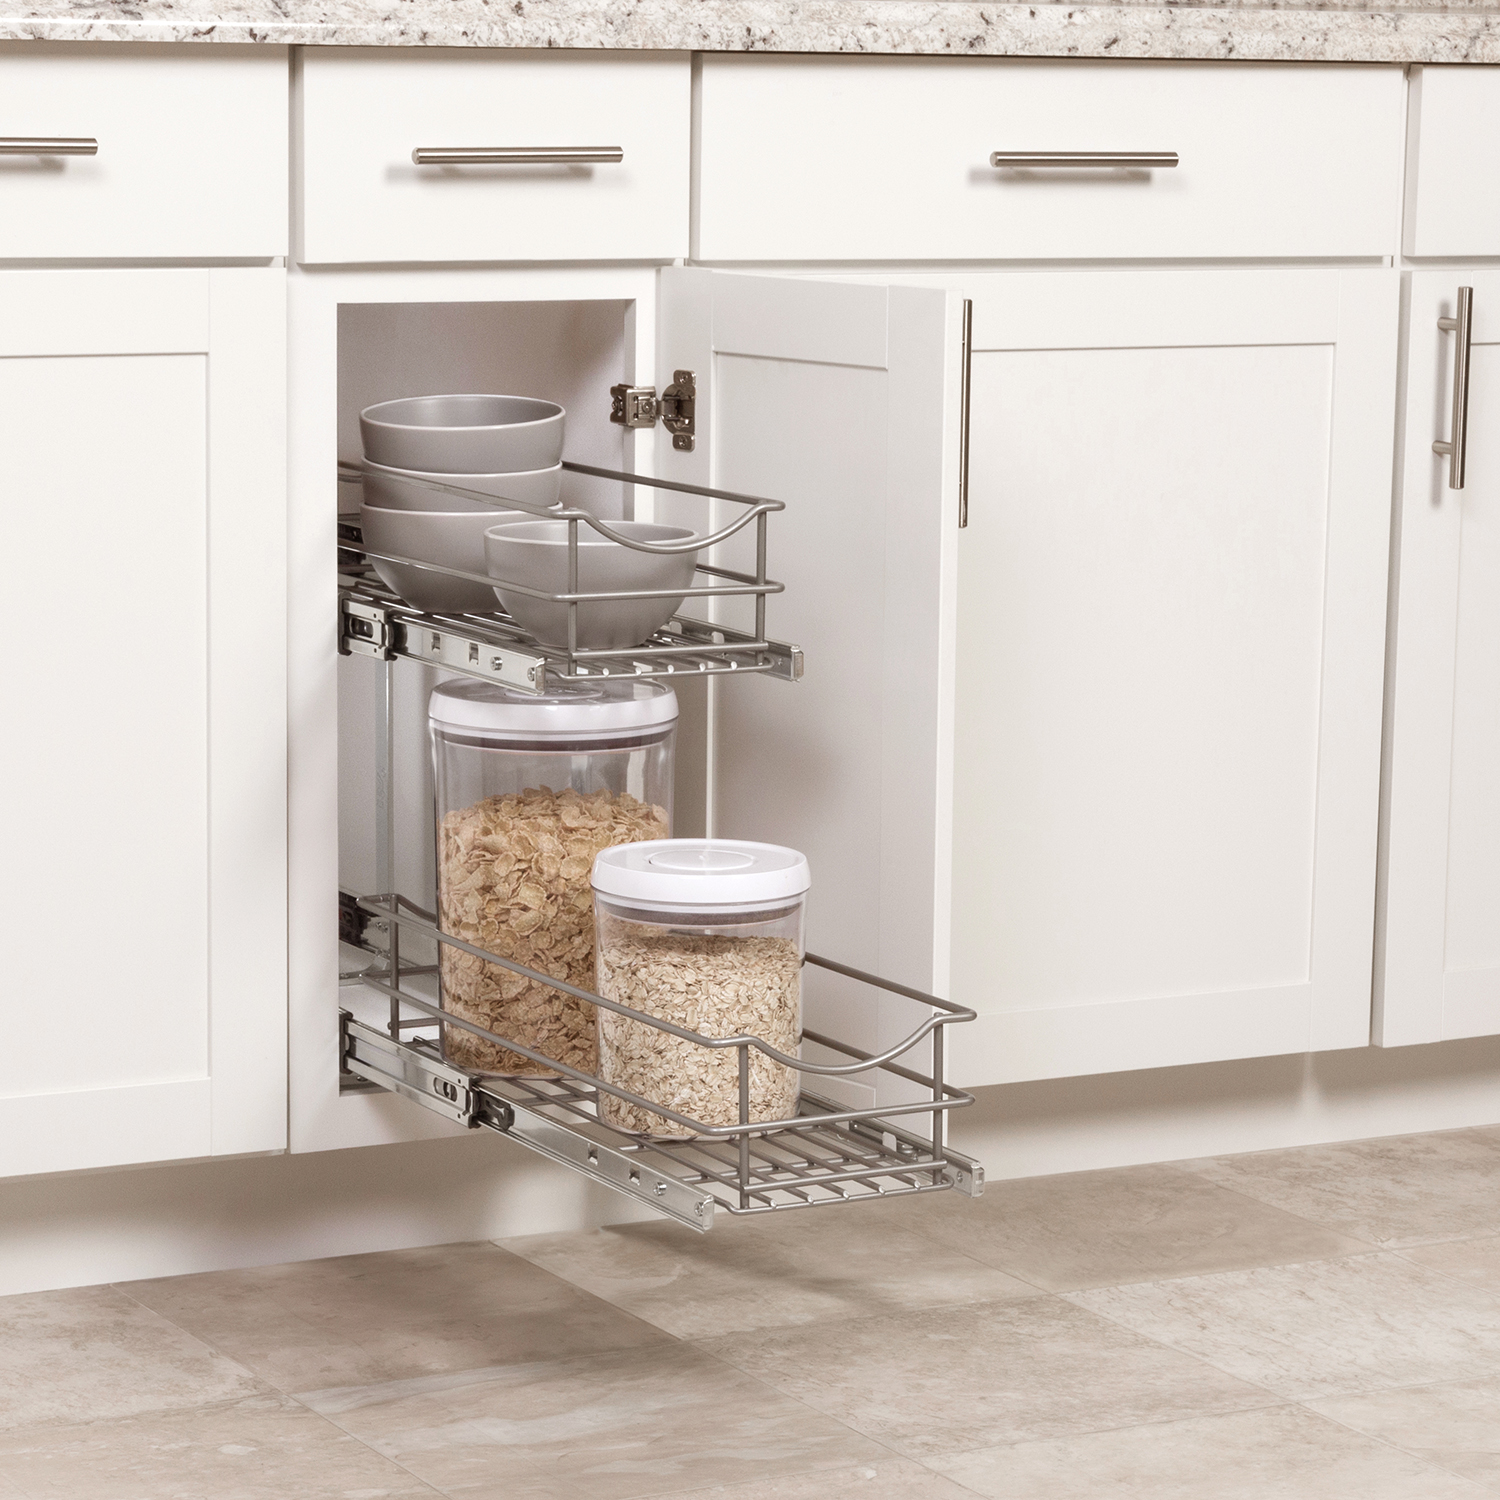 The benefits of cabinet pull out baskets